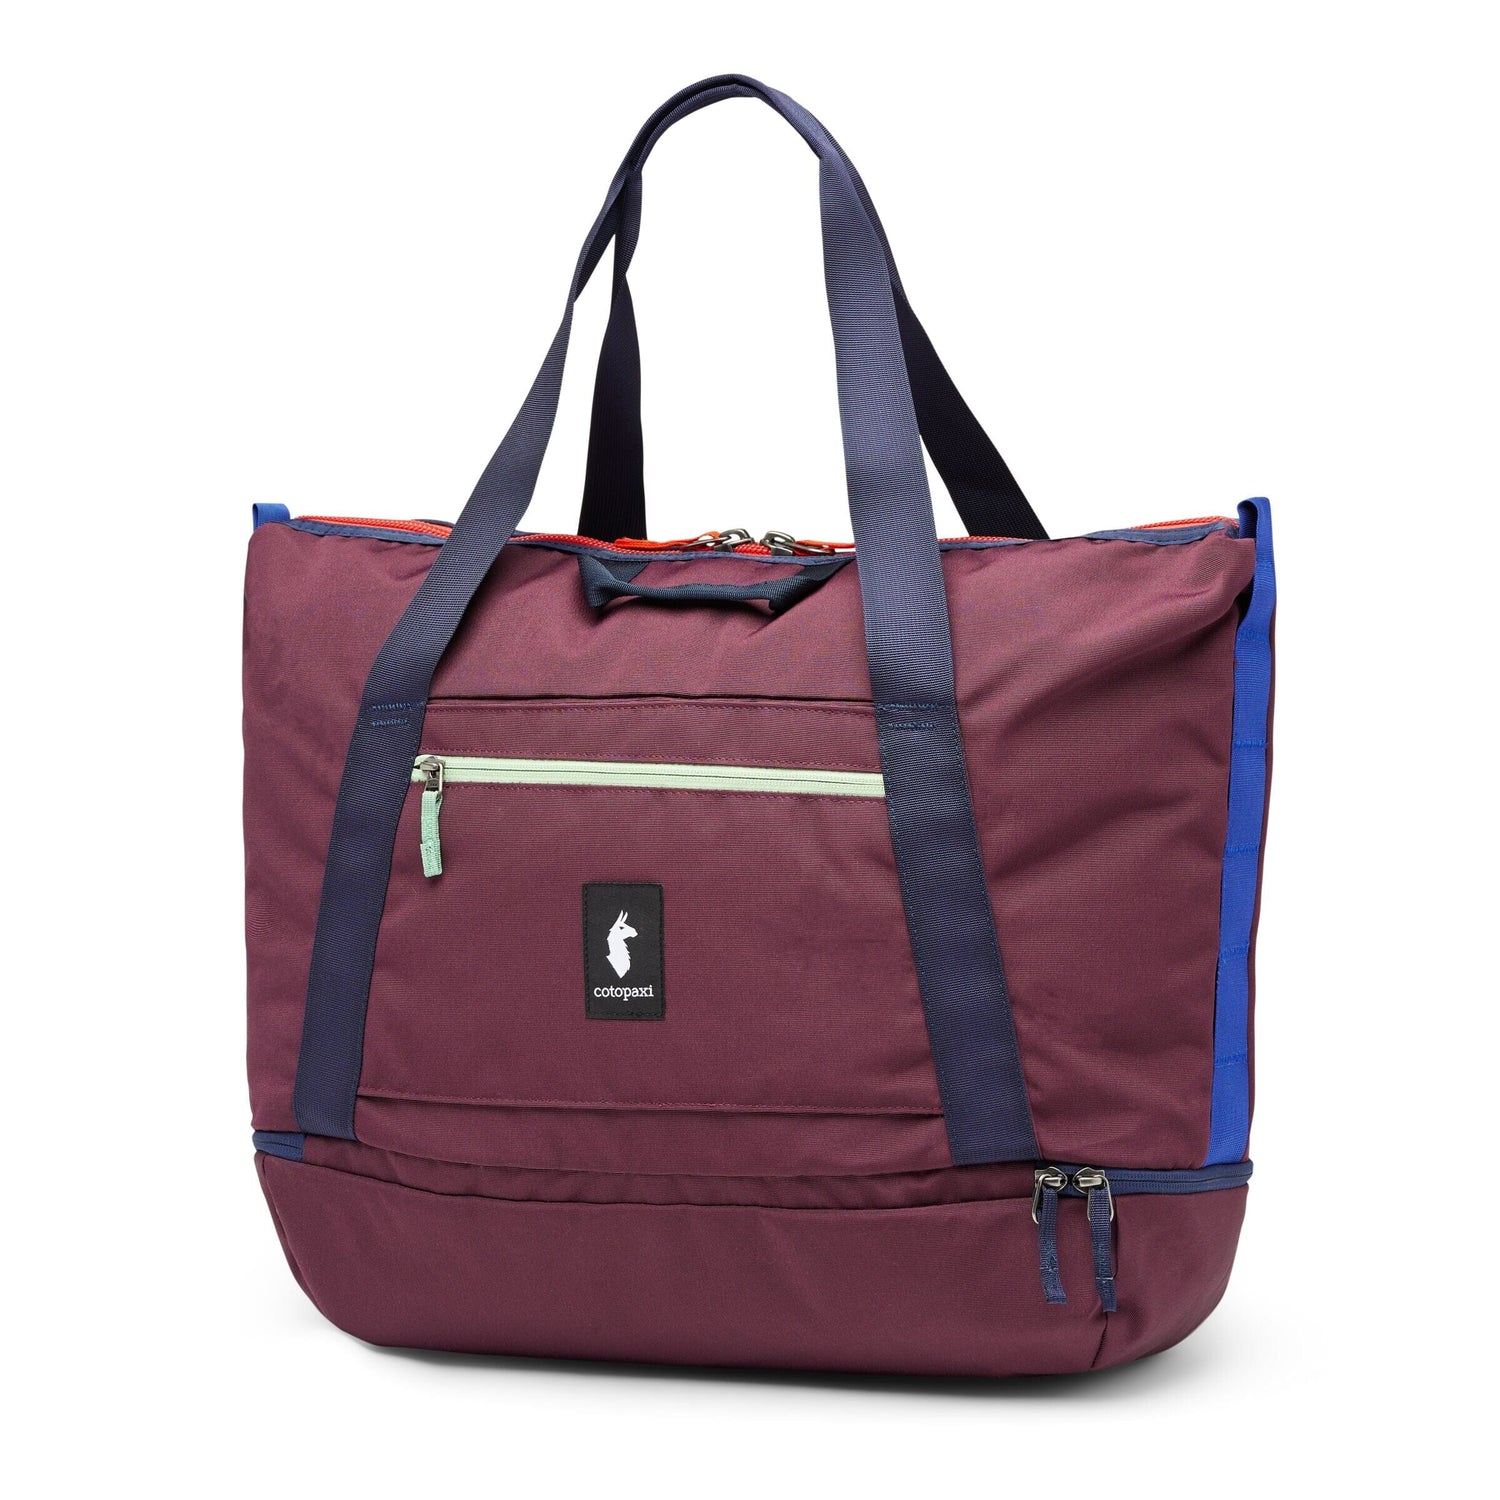 Cotopaxi Viaje 35L Weekender Bag - Recycled polyester Wine Bags